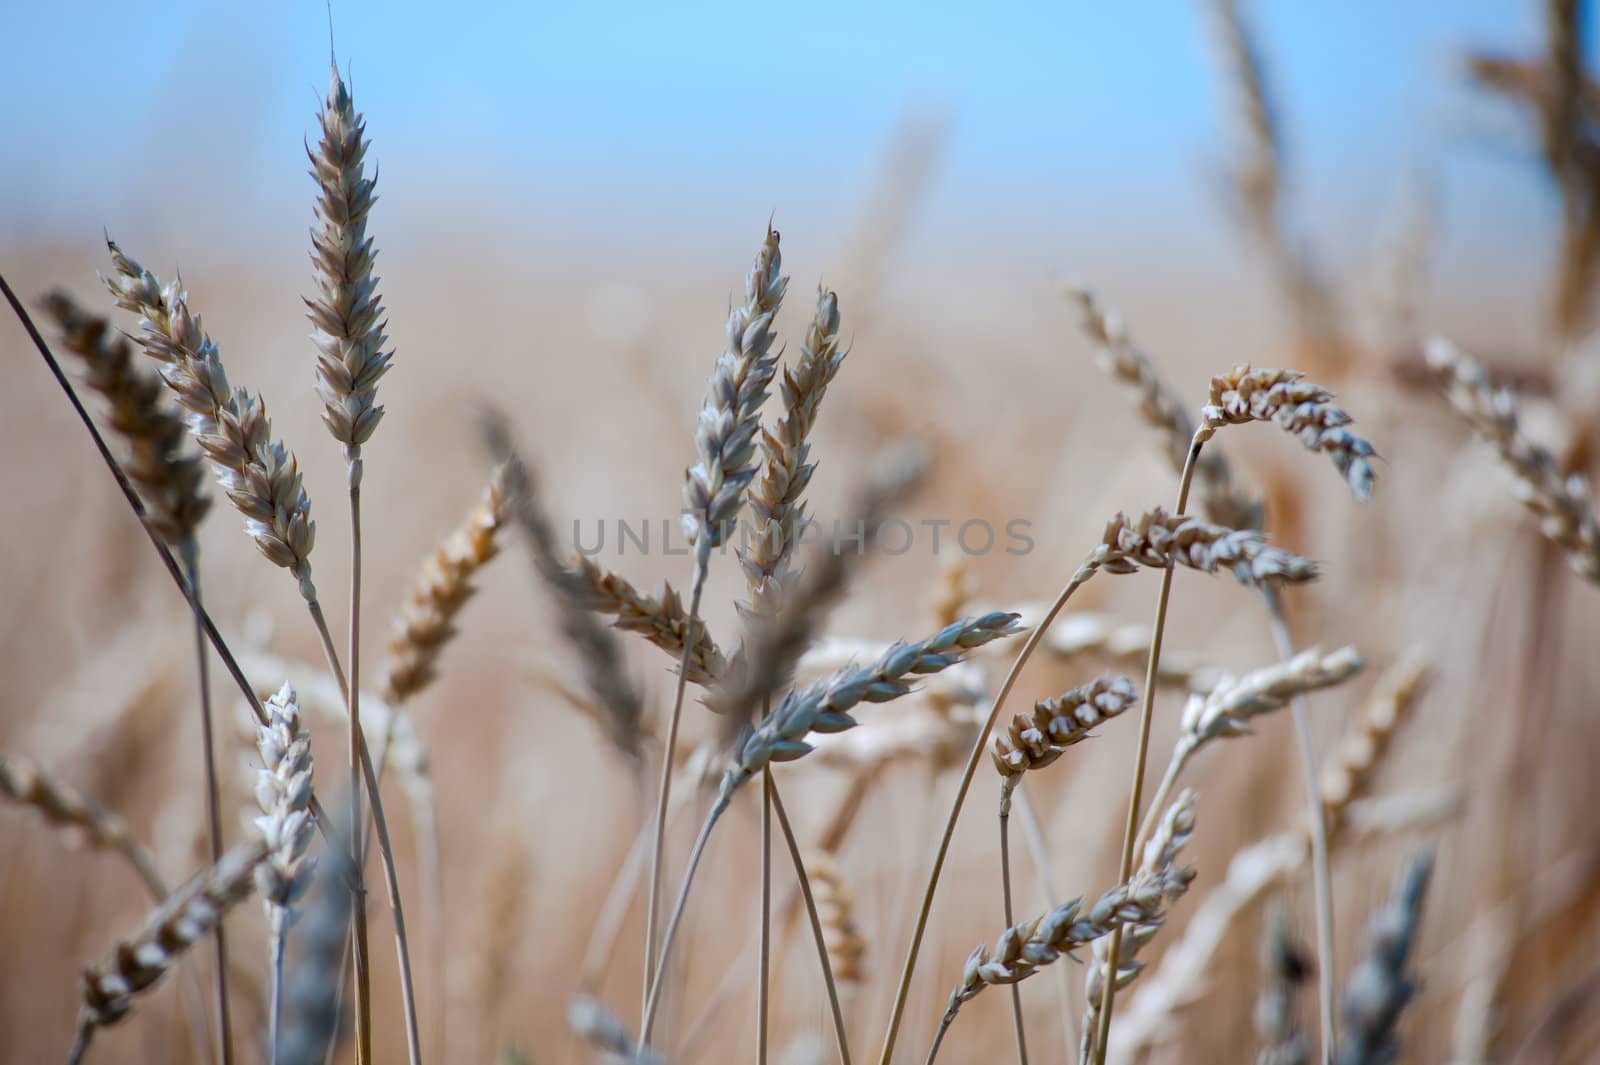 Field of golden wheat ready to harvest